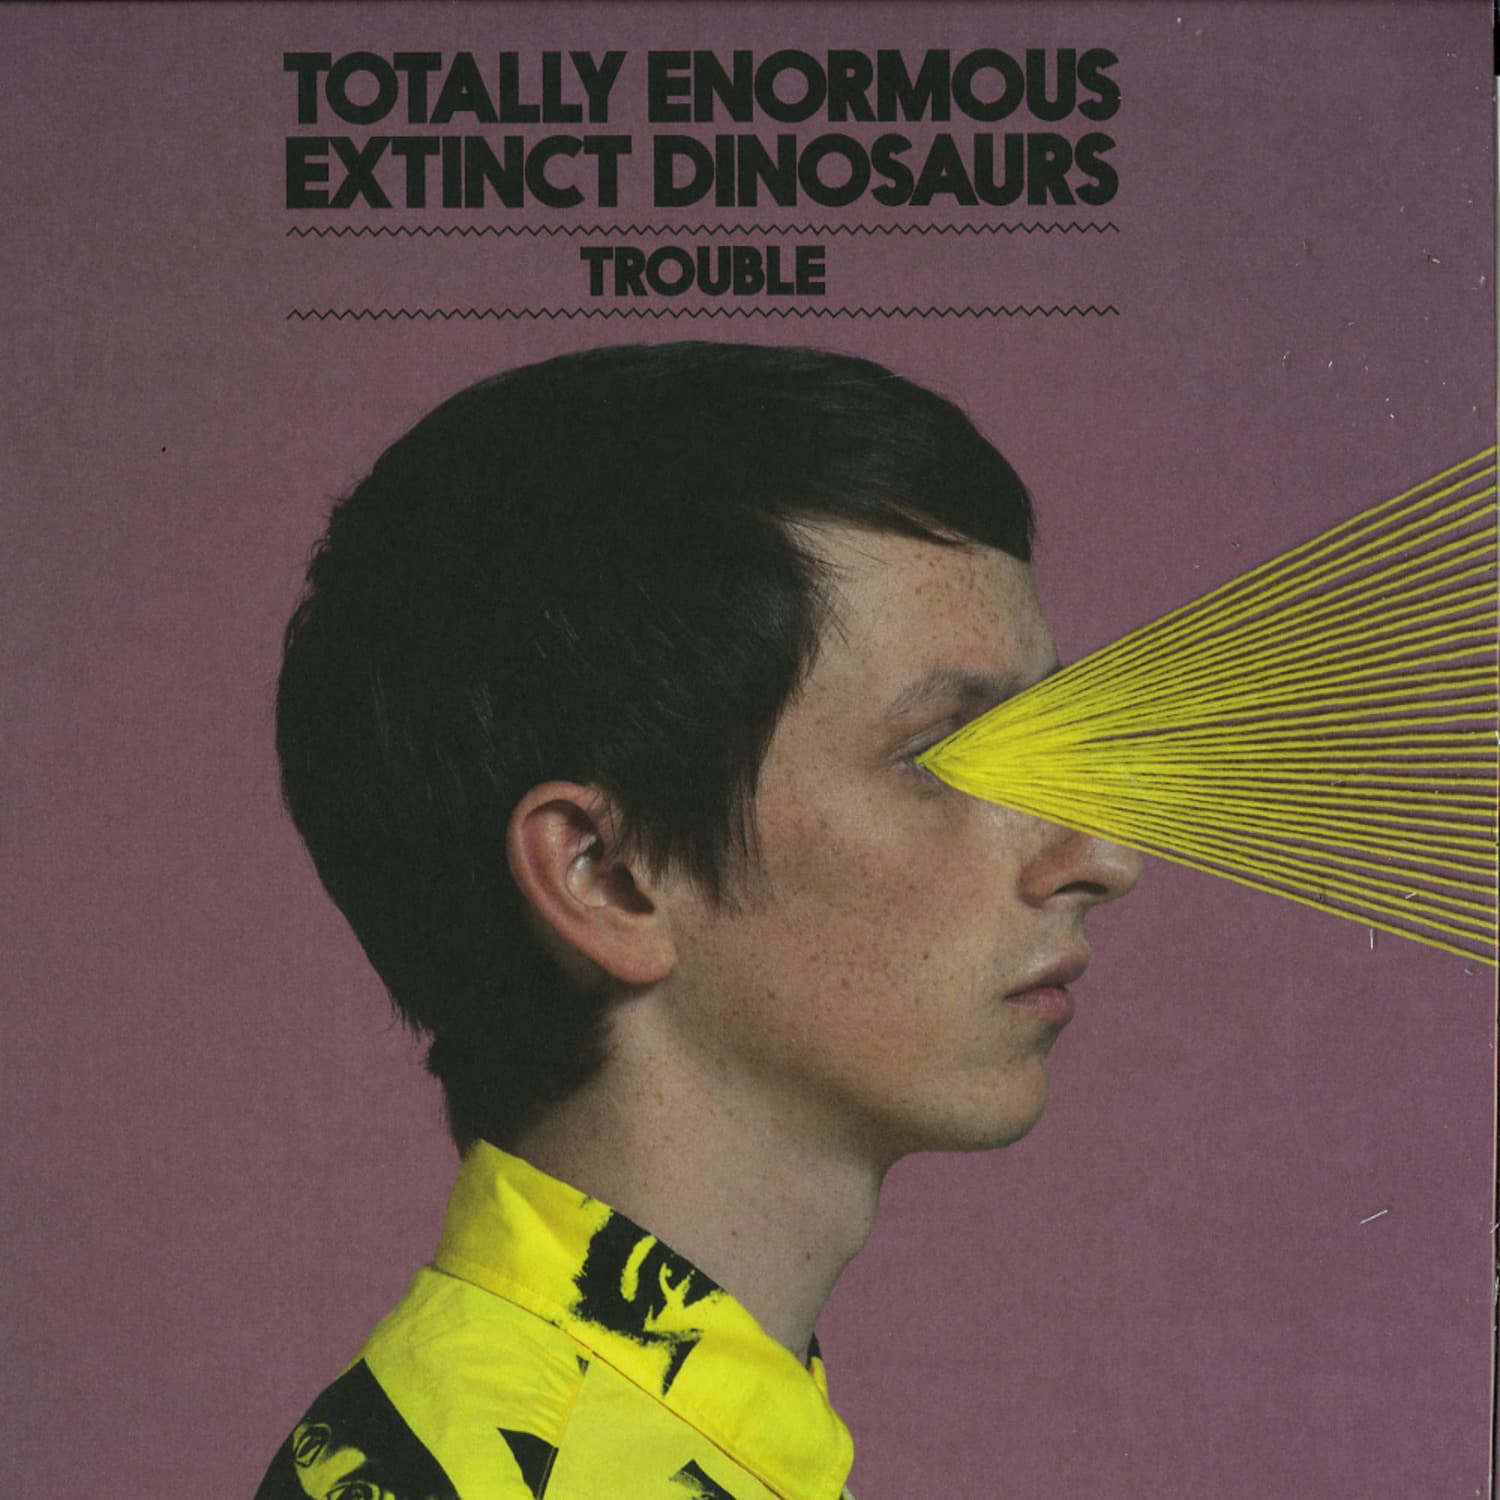 Totally Enormous Extinct Dinosaurs - TROUBLE